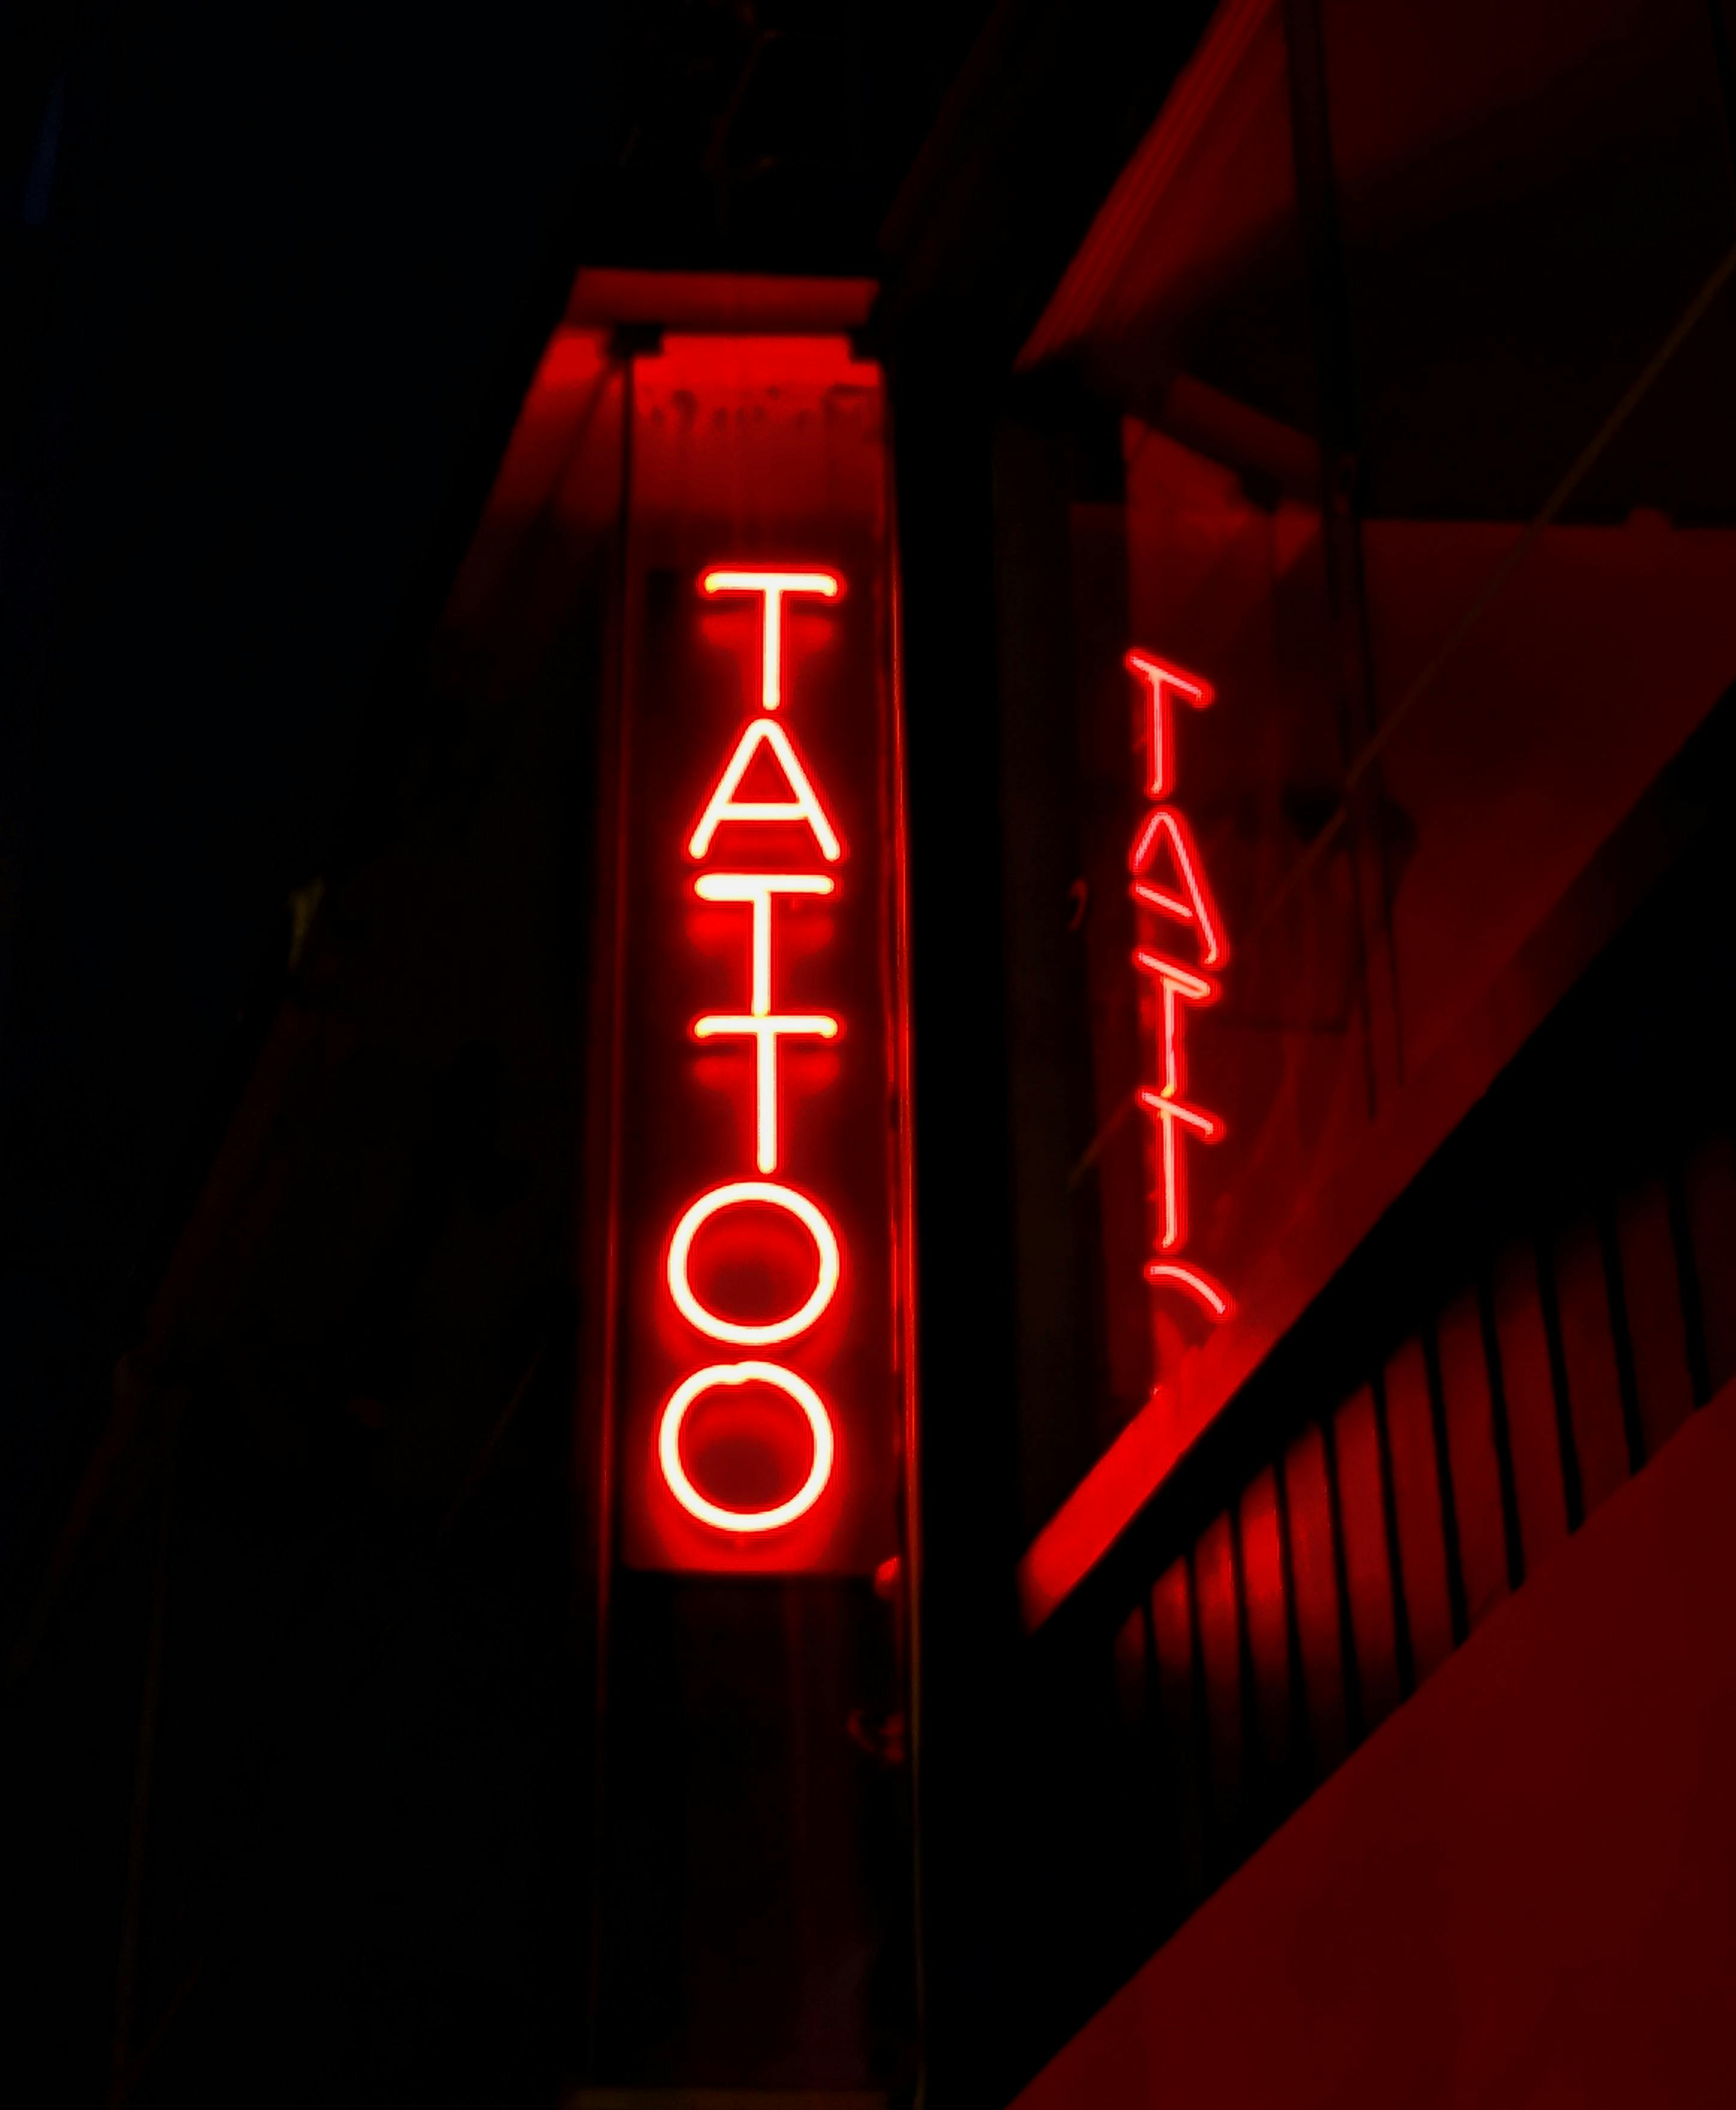 SpellBrite TATTOO  PIERCING NeonLED Sign for Business 311 x 150  Ultra Bright Energy Efficient LongLife LED Visible Indoors from 500  Feet with 8 Animation Settings Red  Amazoncouk Lighting